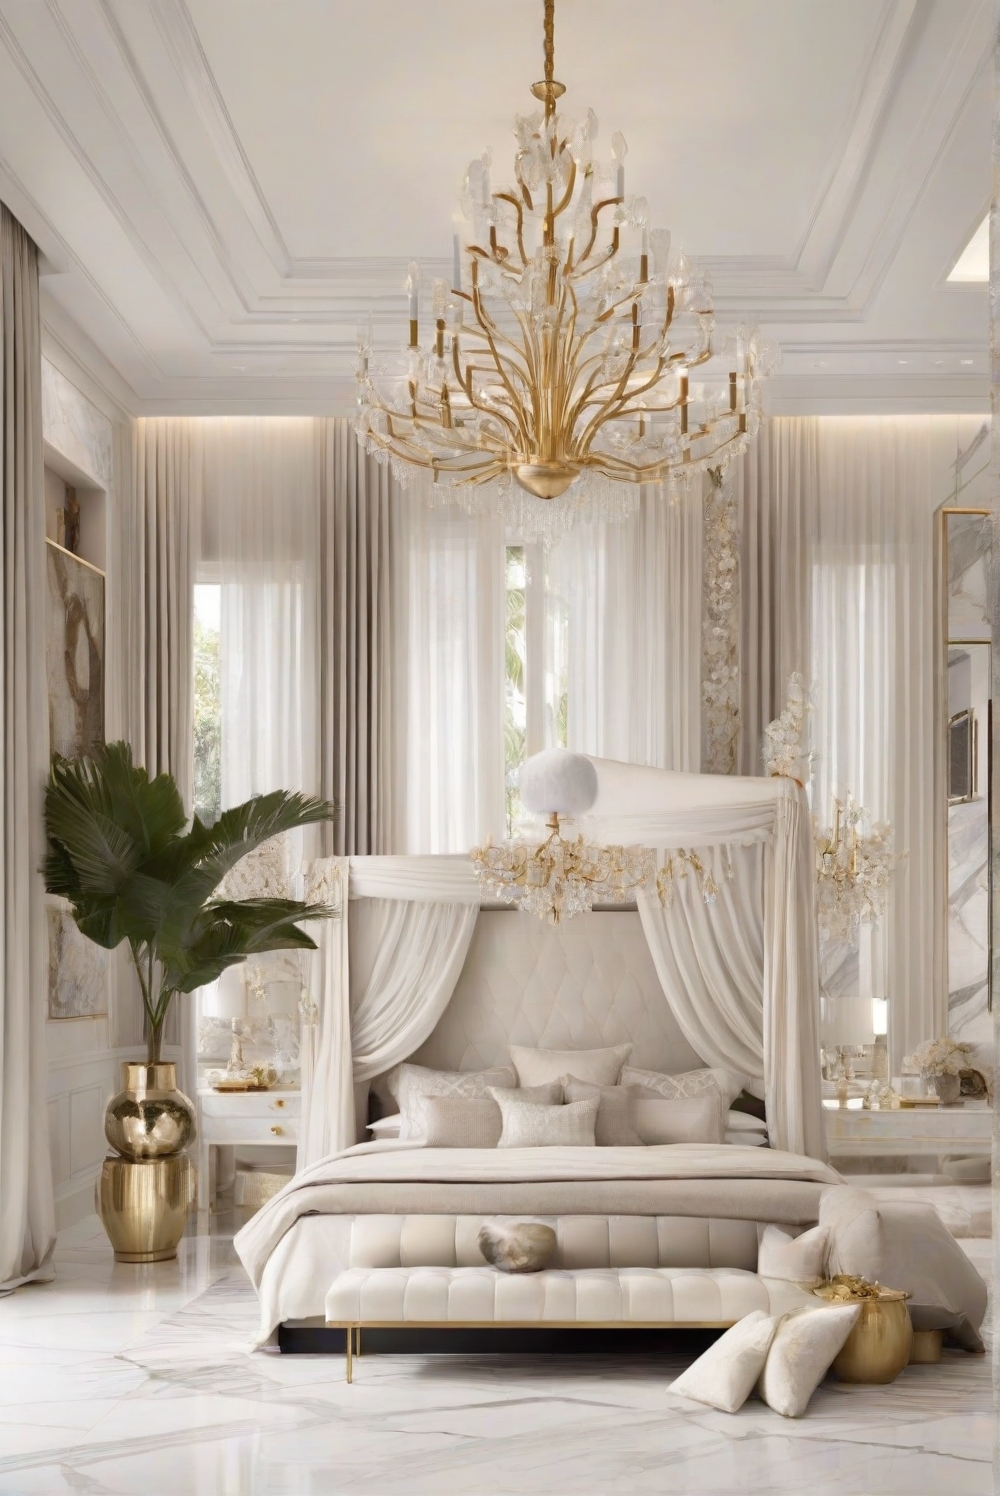 luxury home decor, chic home furnishings, high end interior design, elegant home accents, designer room decoration, upscale interior styling, luxury living room design